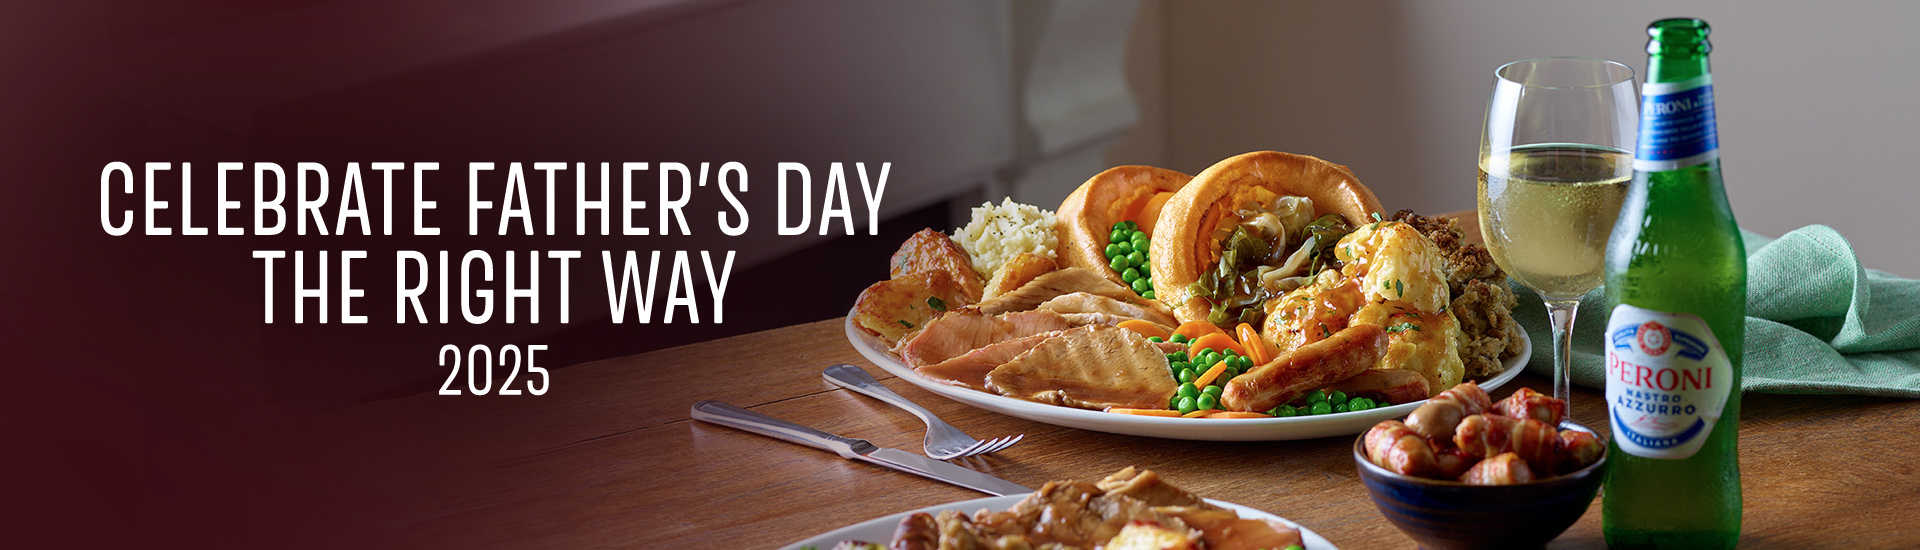 Father’s day carvery in Darlington